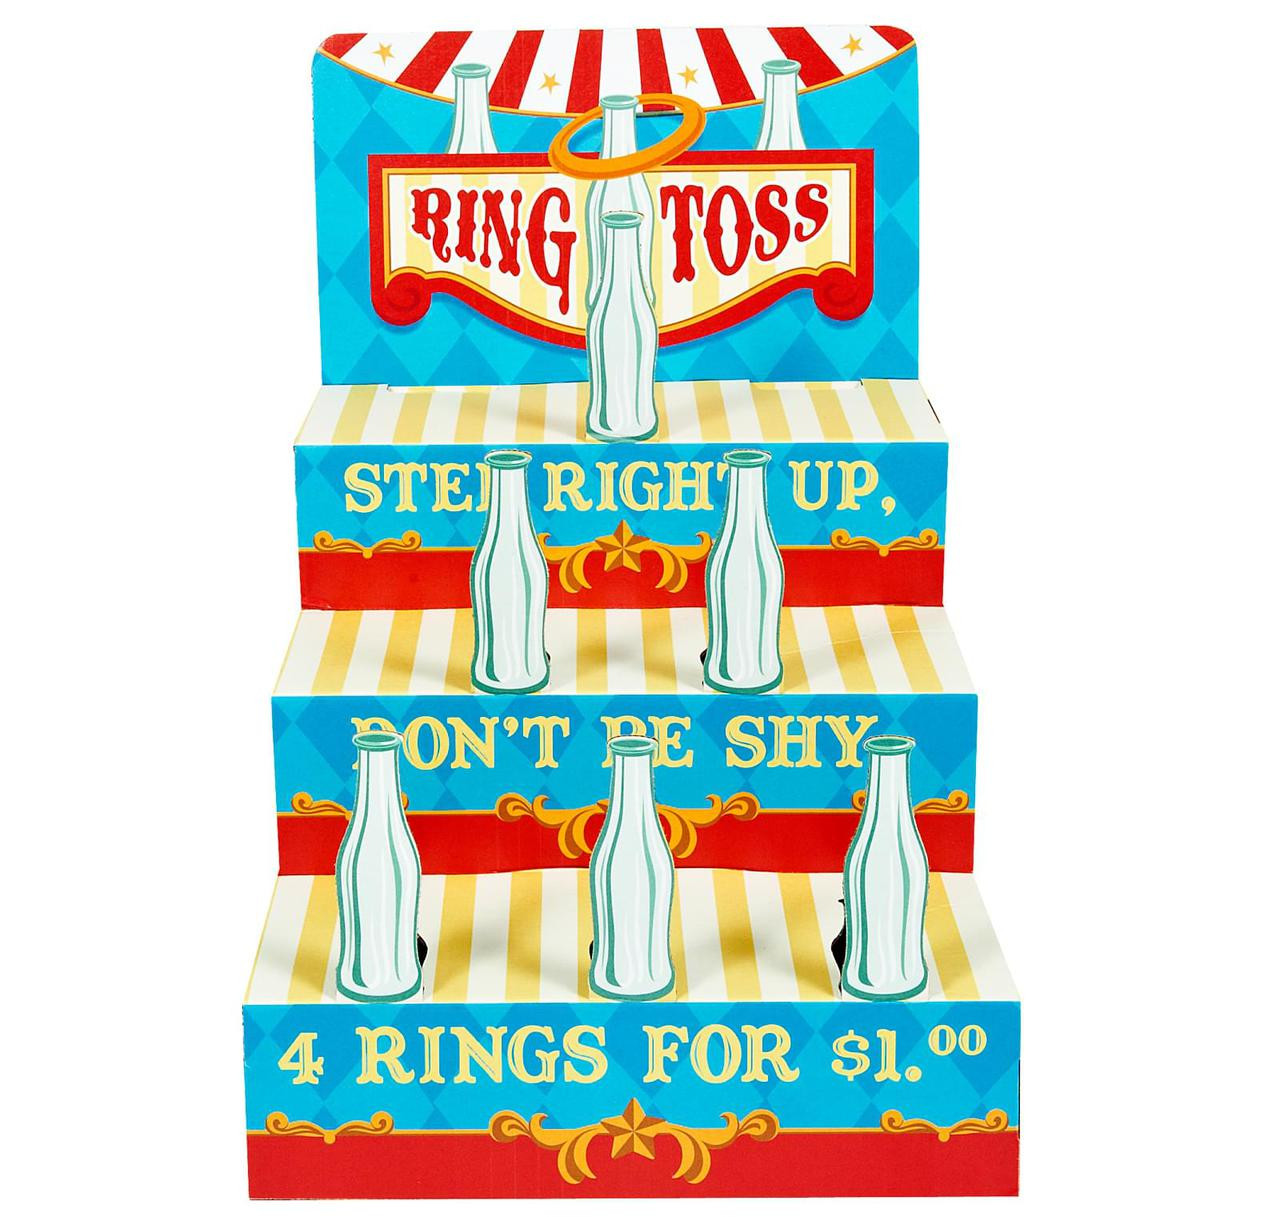 ring toss game